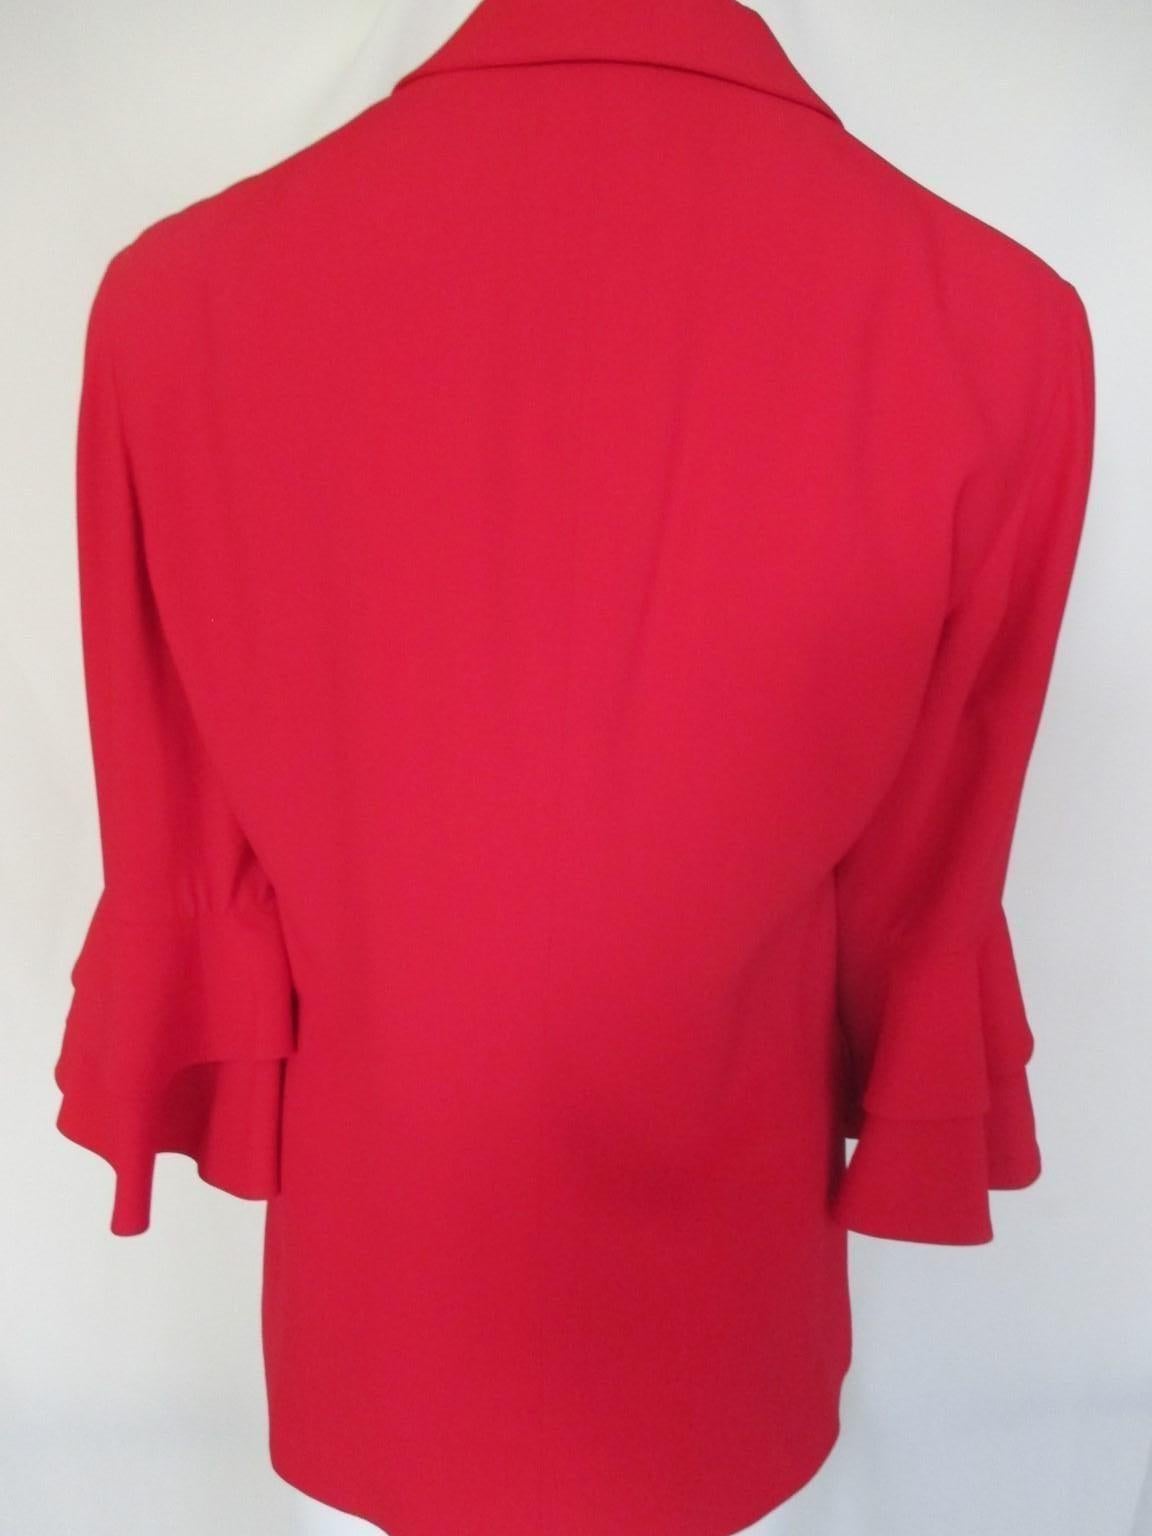 Moschino Couture! Repetita Juvant Red Blazer Jacket In Good Condition For Sale In Amsterdam, NL